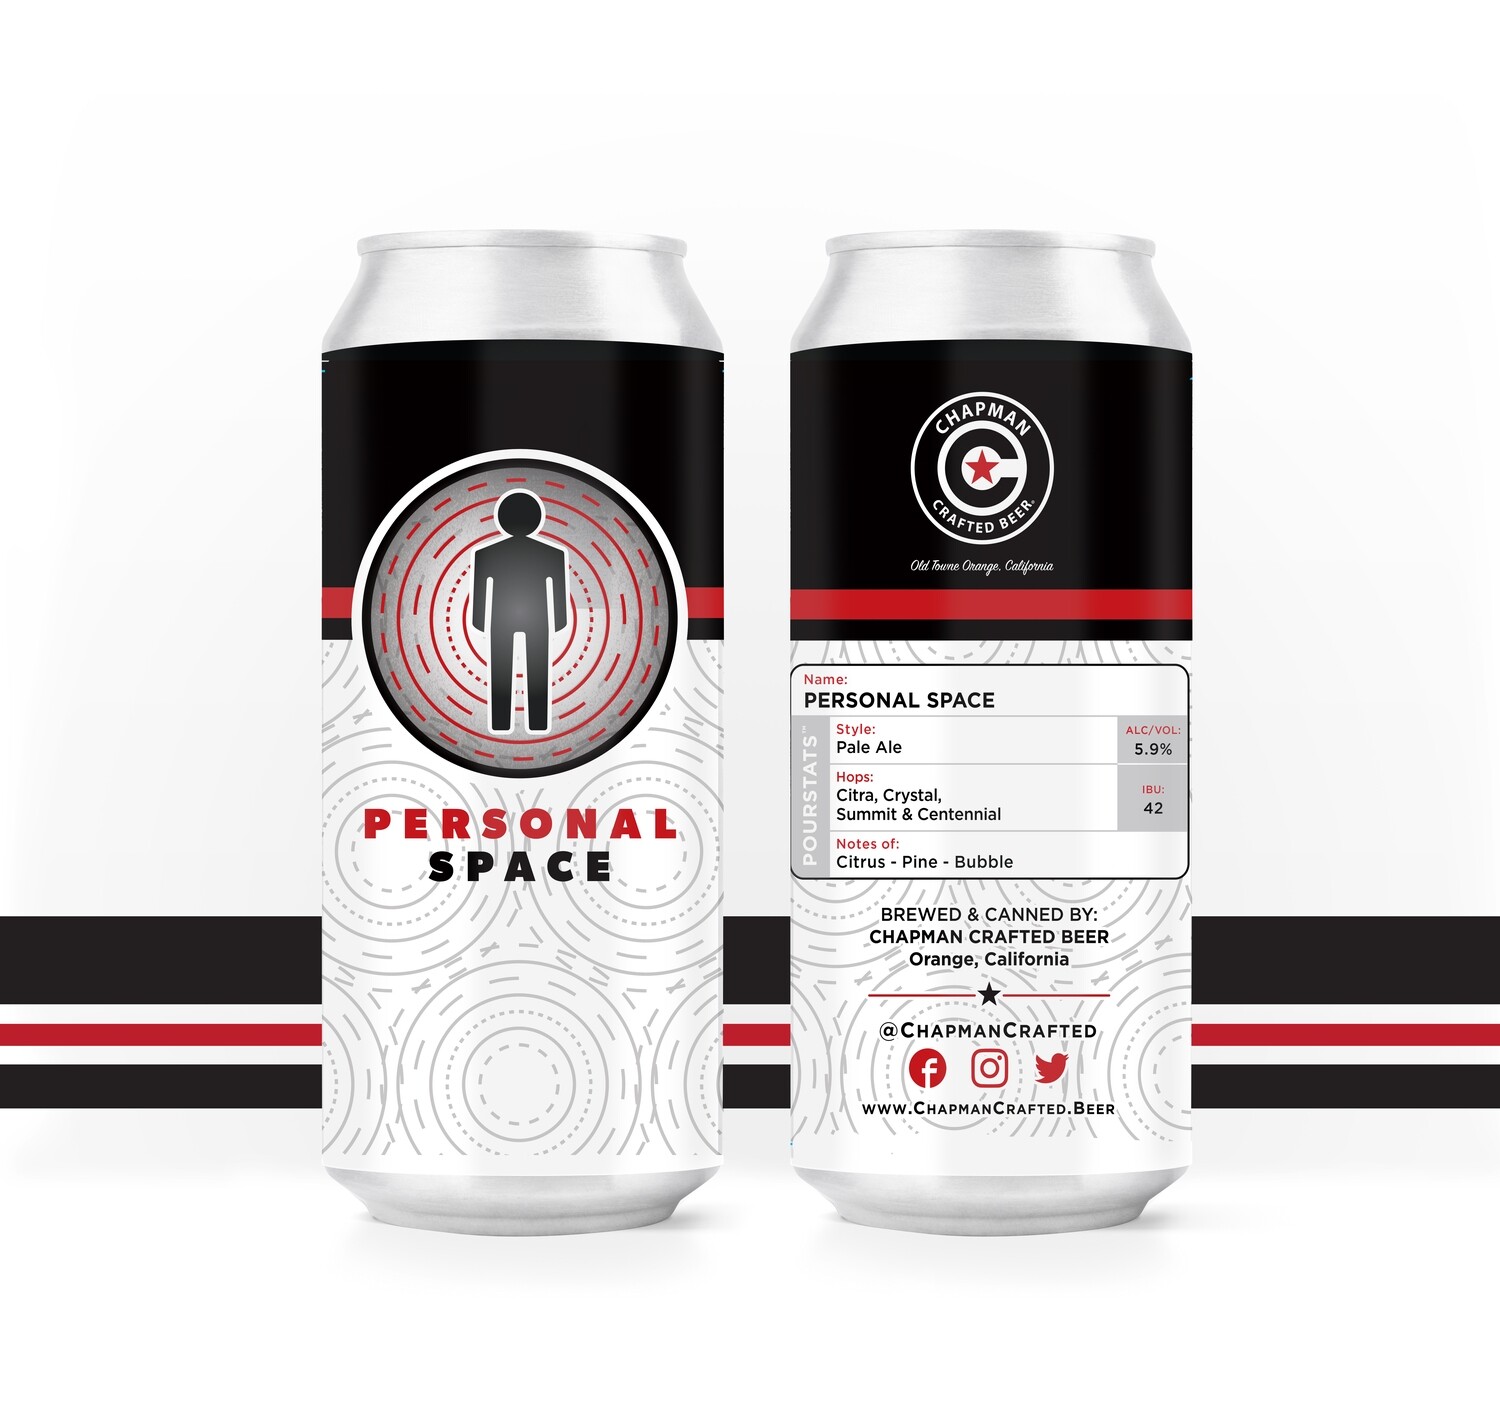 Personal Space full case (24 x 16oz. cans)